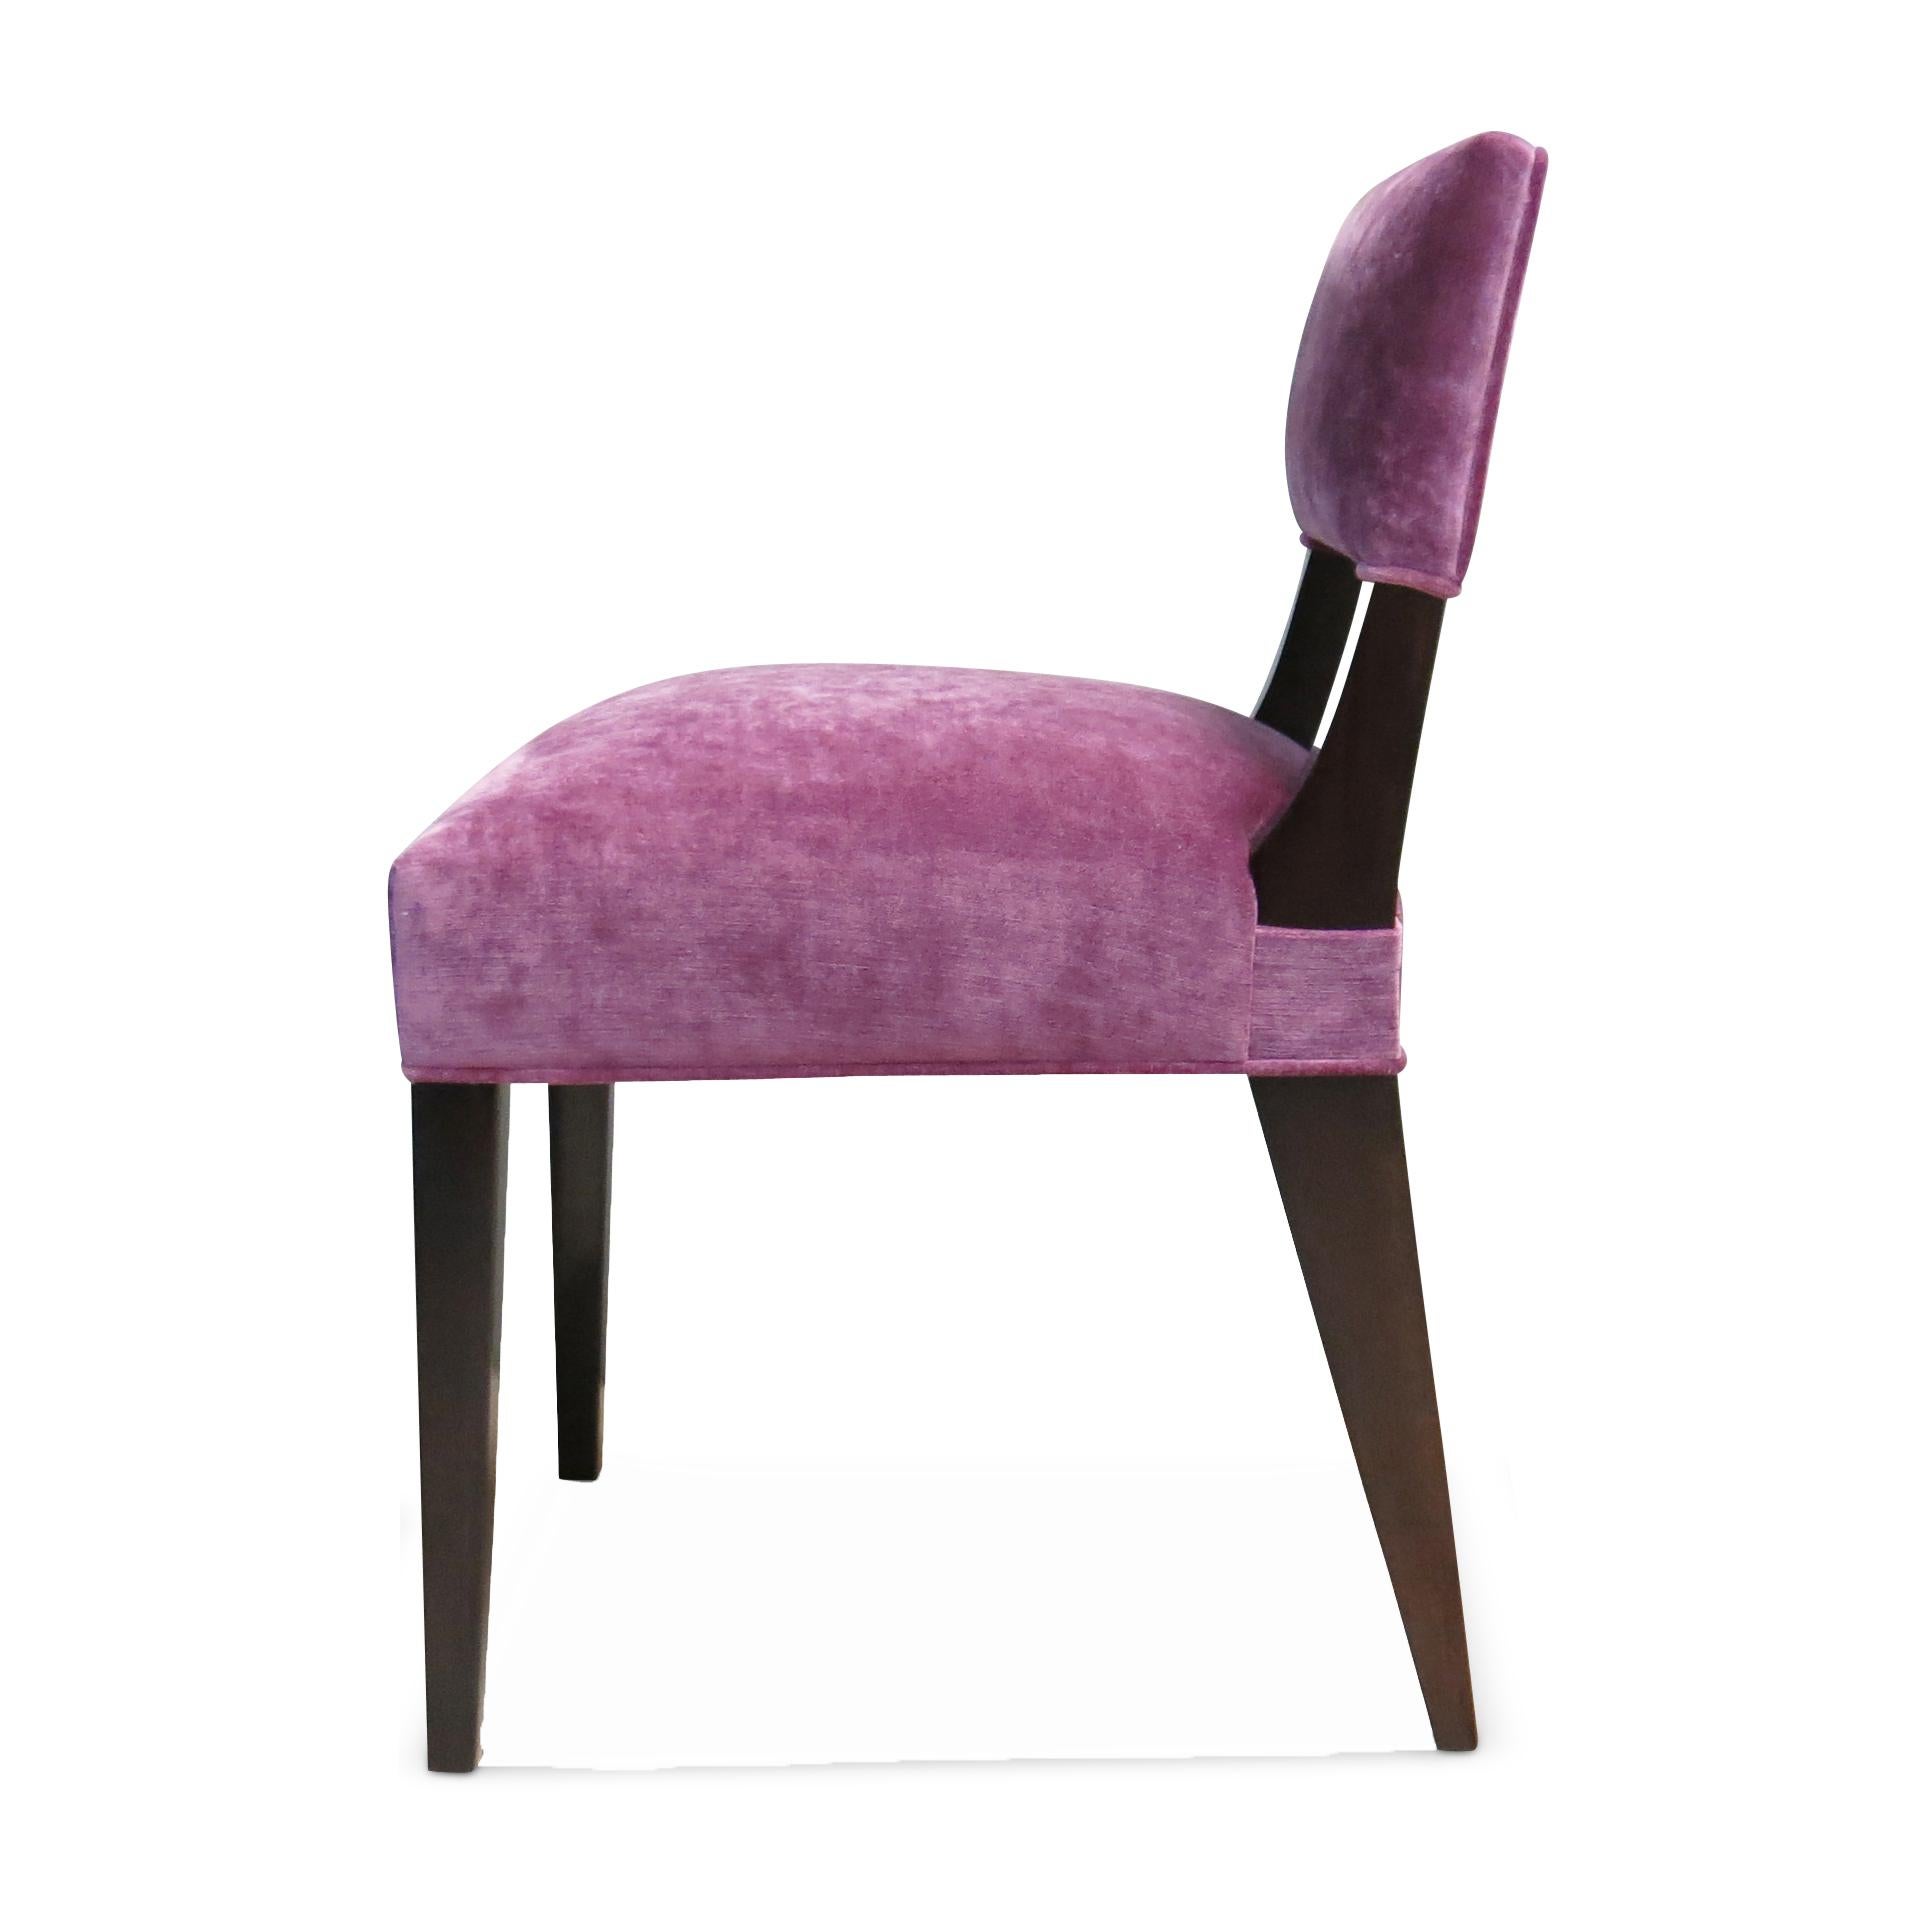 Argentine Set of Four Pink Modern Dining Chairs from Costantini, Bruno, in Stock For Sale